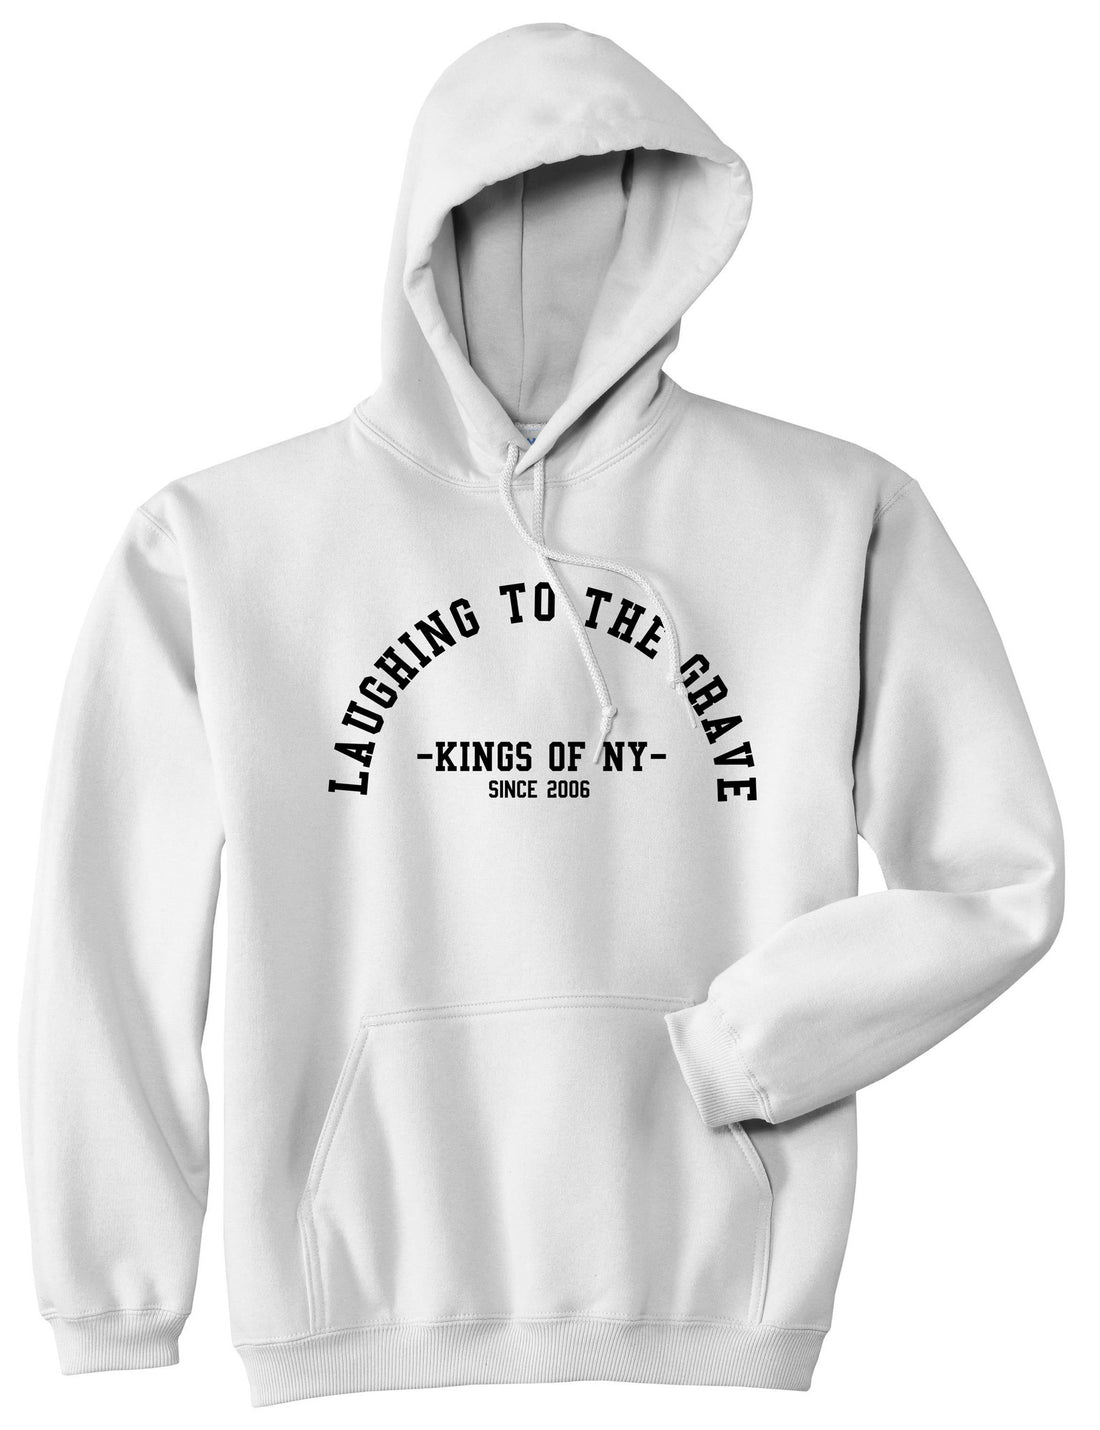 Laughing To The Grave Skull 2006 Pullover Hoodie in White By Kings Of NY